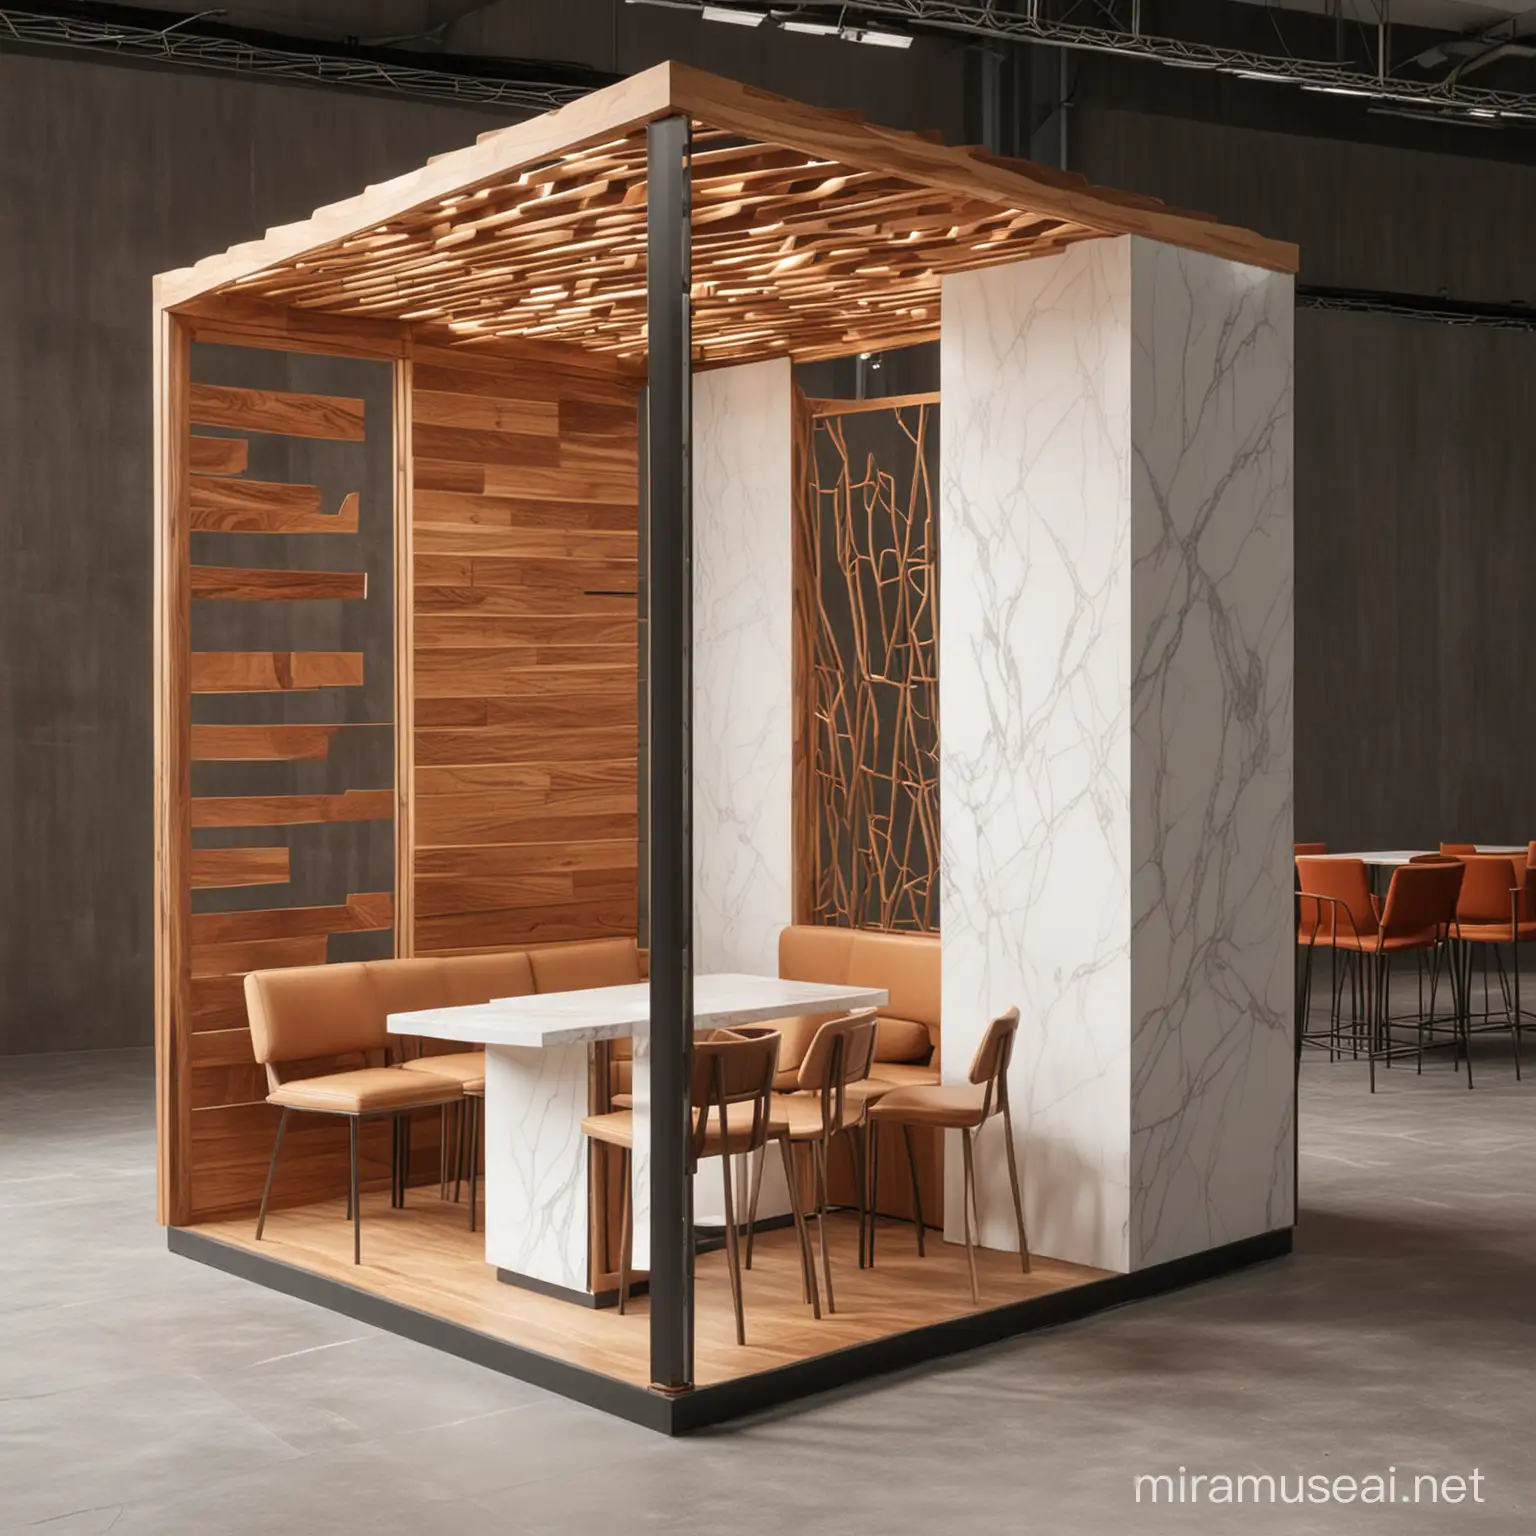 Contemporary NubianInspired Modular Booth with Diverse Materials